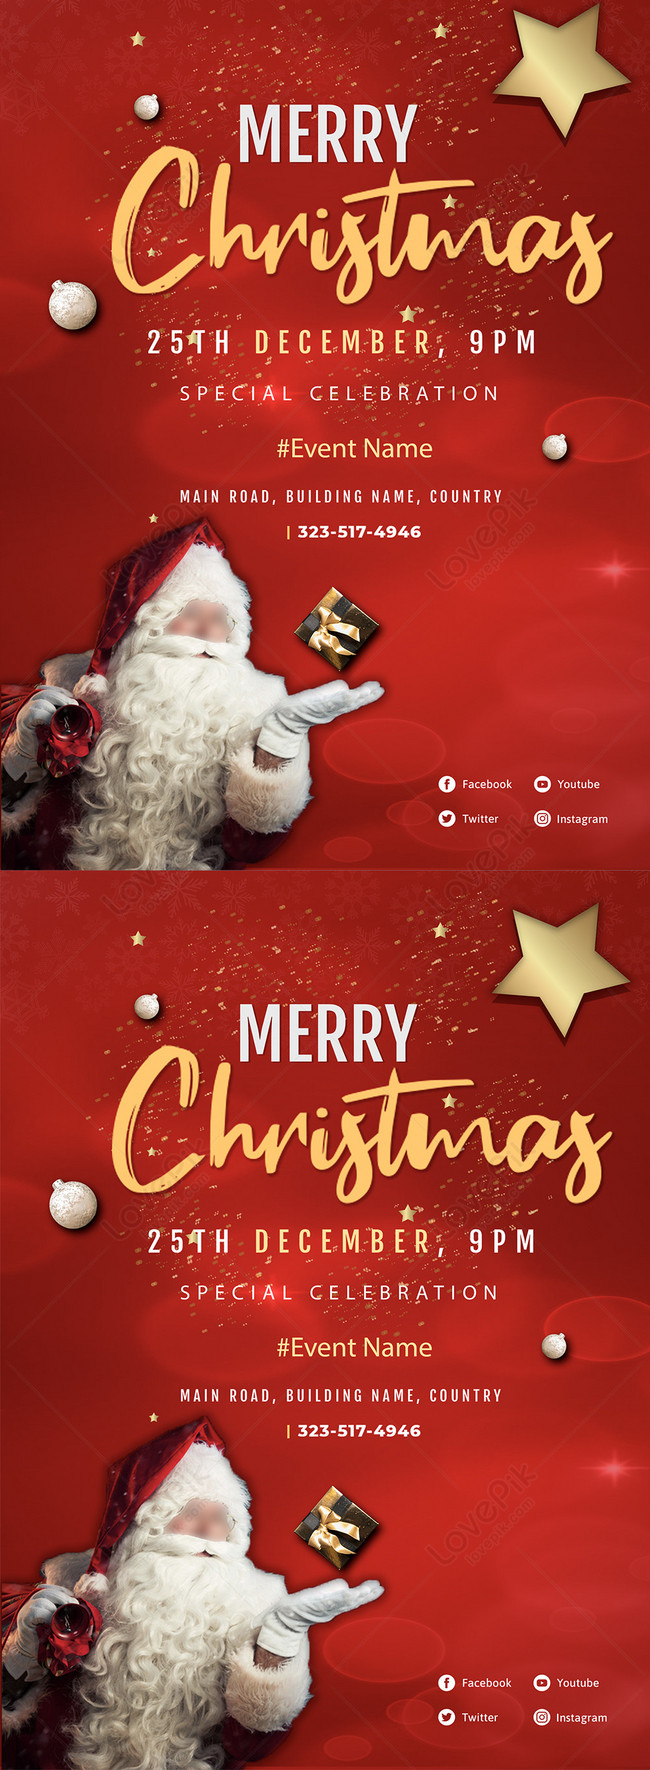 Red merry christmas event flyer template image_picture free download  